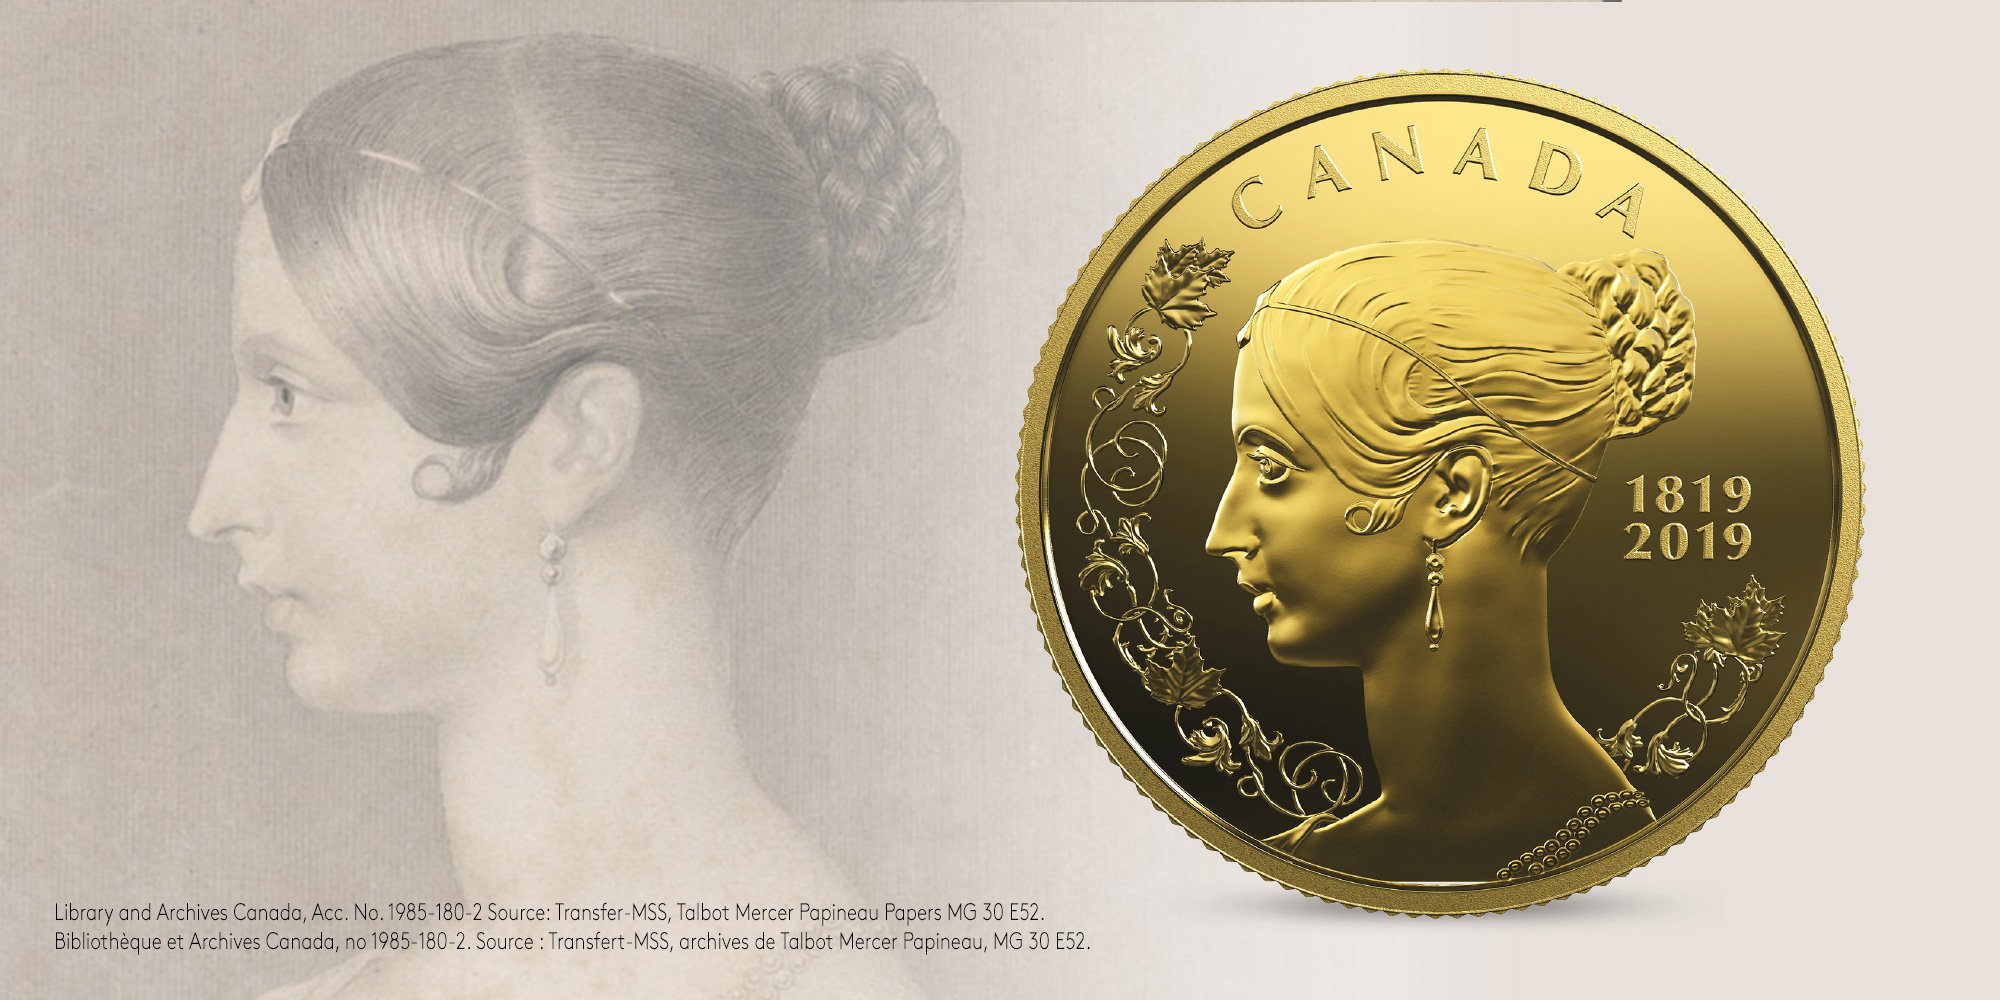 The original portrait (c. 1842-1850) was drawn by R.J. Lane. It exudes classic Victorian elegance and is framed with a decorative pattern typical of that era. Mint engravers took their inspiration from the original garland and reinterpreted it for this new 2019 $10 pure gold coin, adding some maple leaves to give this bicentennial tribute to Queen Victoria a true Canadian touch.